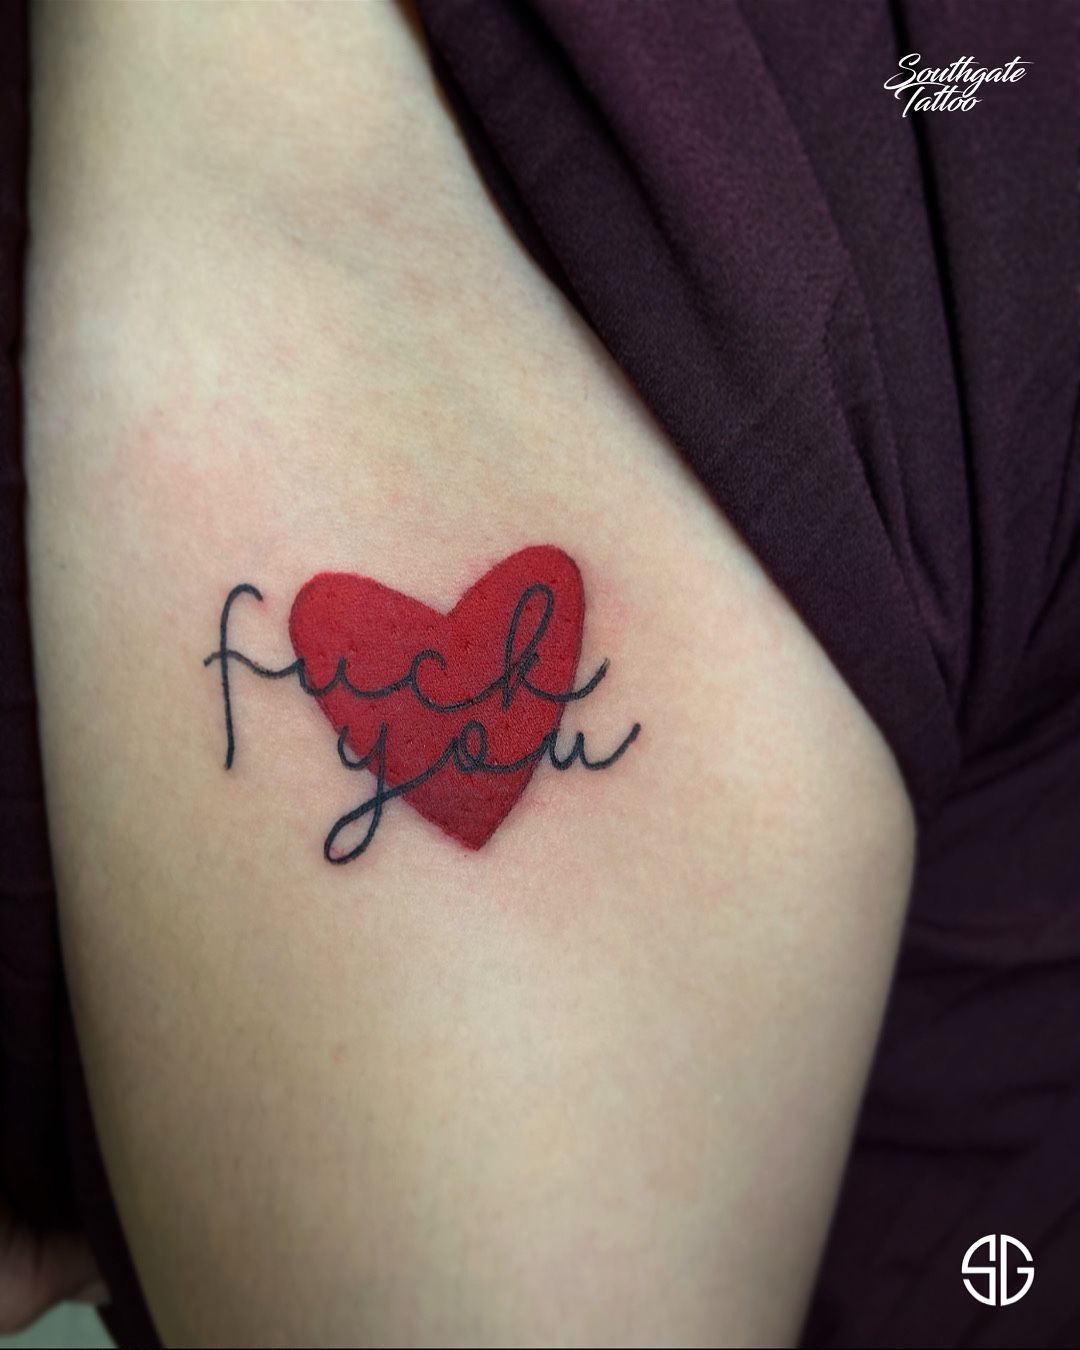 Tattoo uploaded by Southgate SG Tattoo  Piercing Studio    custom  heart by our resident nicoletattoo BookingsInfo southgatetattoo     heart hearttattoo fuck you covid19 southgatetattoo sgtattoo sg  londontattooartist 